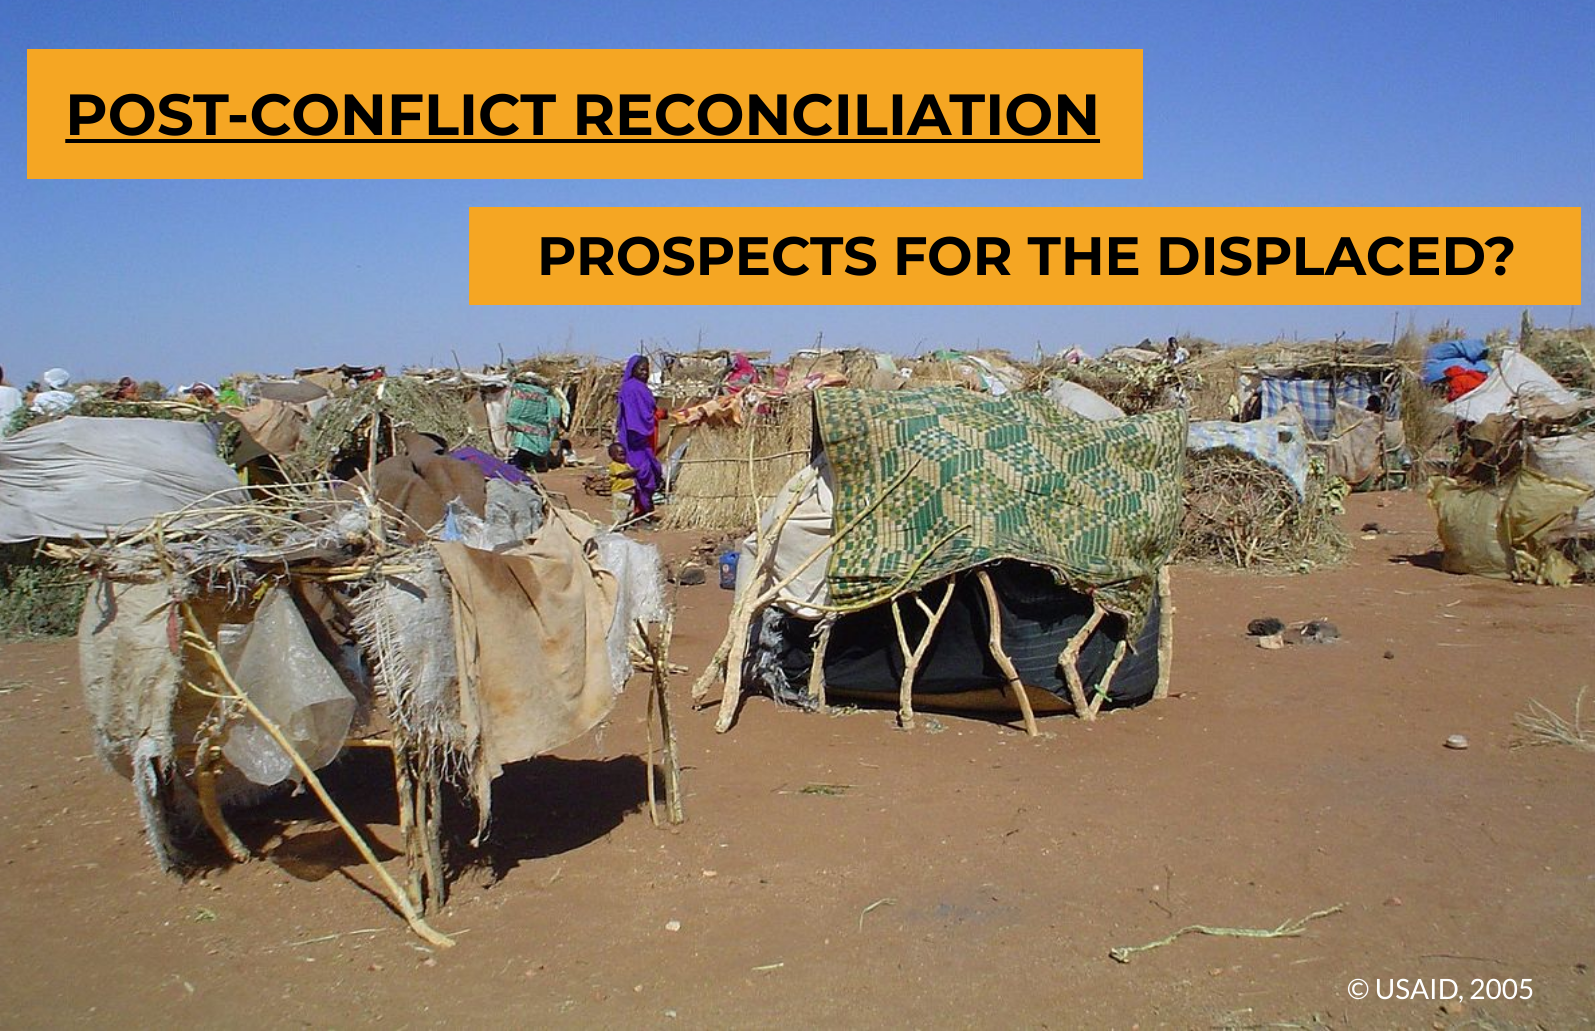 https://sihma.org.za/photos/shares/post-conflict-r_49707680 (1).png